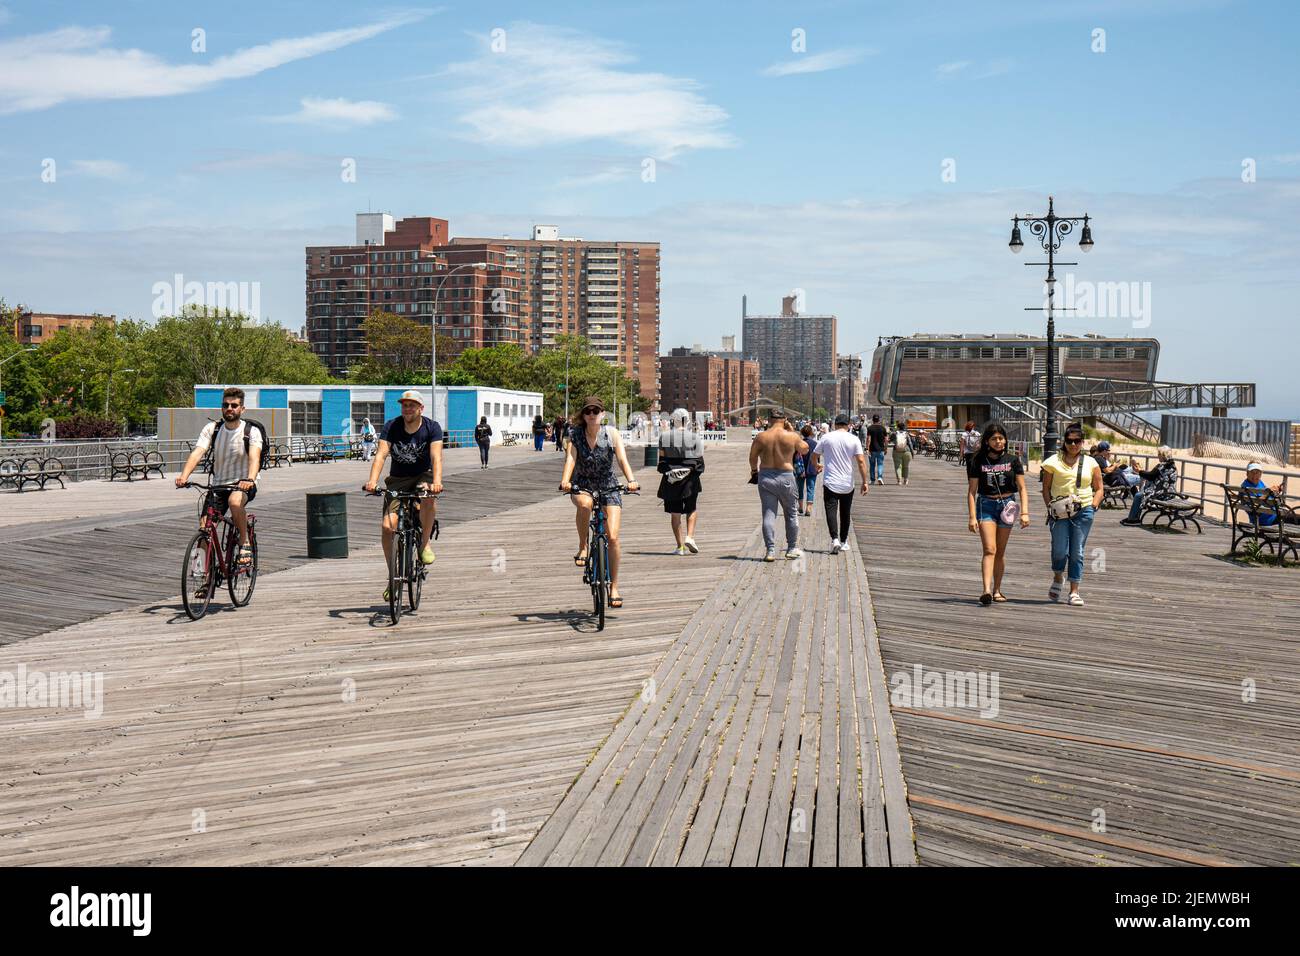 People cycling on Riegelmann Boardwalk in Coney Island district of Brooklyn, New York City, United States of America Stock Photo